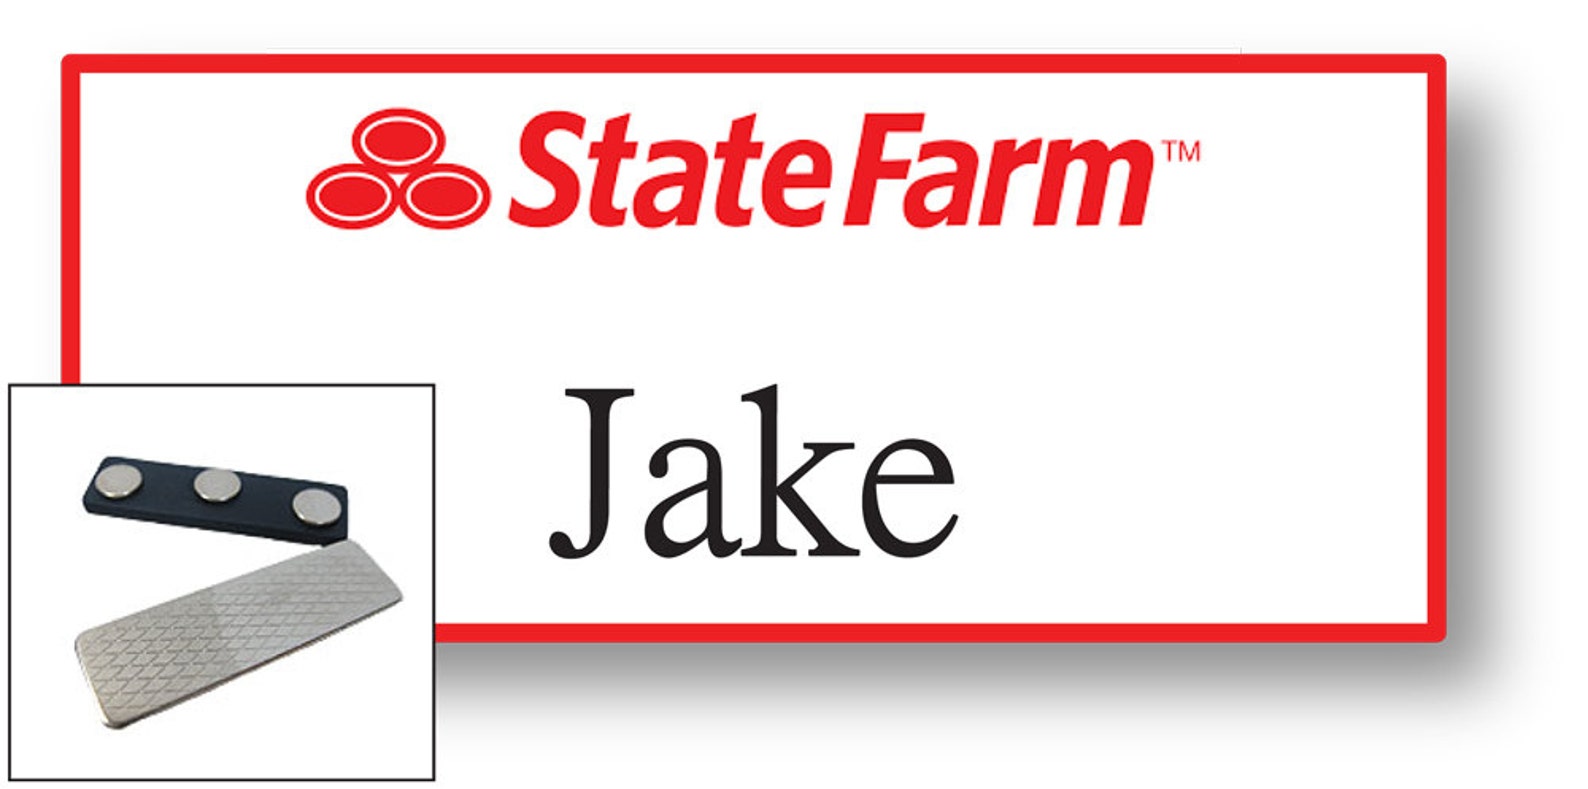 1 JAKE From State Farm Halloween Costume Name Badge Tag With a Etsy